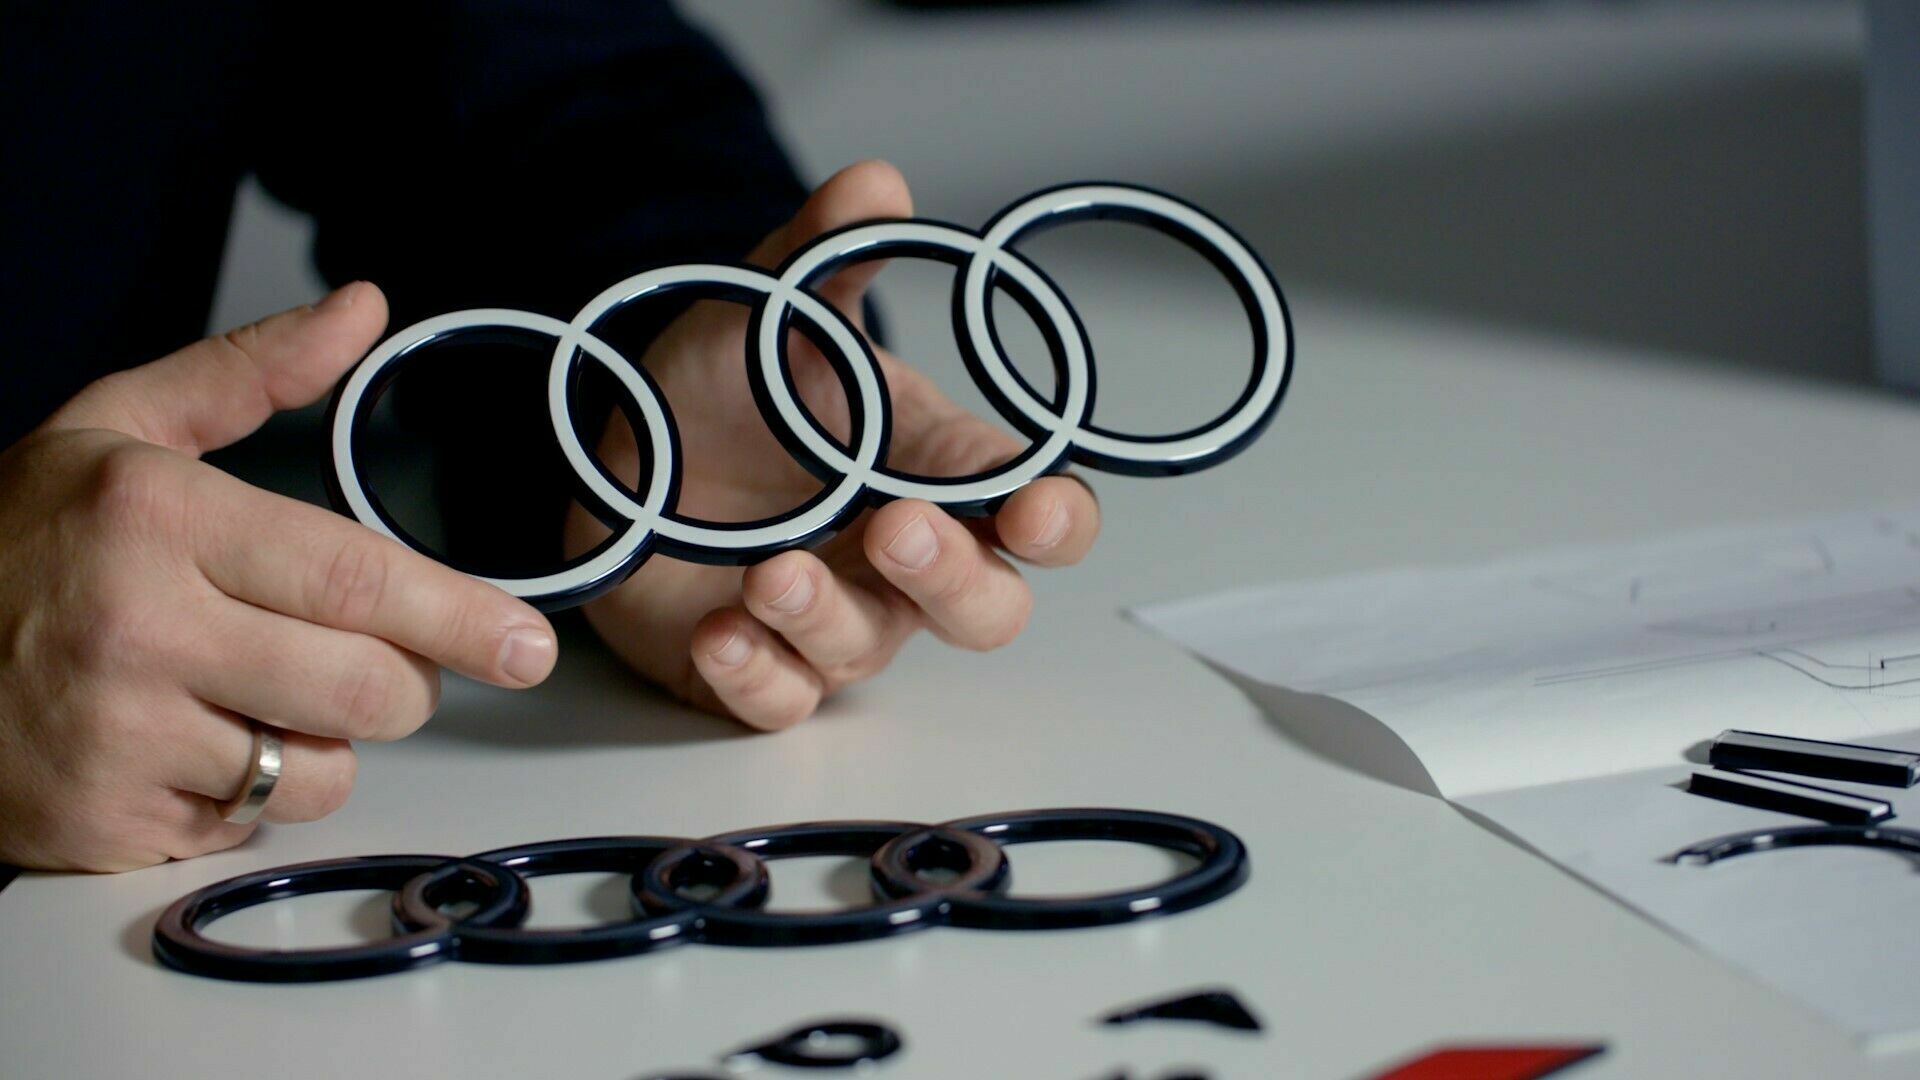 More purity, more reduction, more consistency: The new rings from Audi